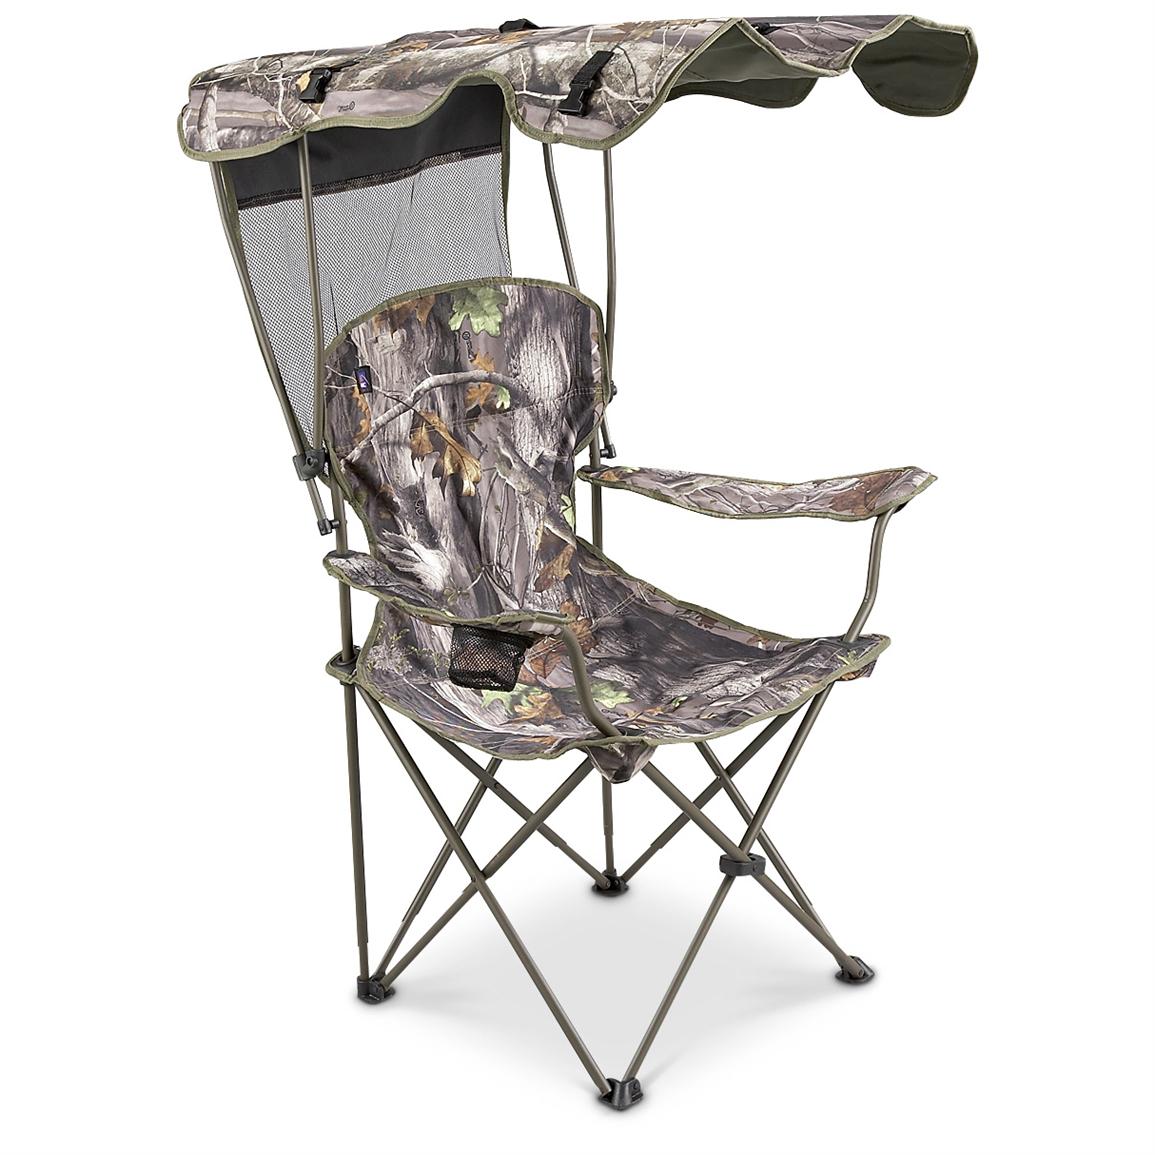 Canopy Chair Realtree Camo 159838 Chairs At Sportsman S Guide